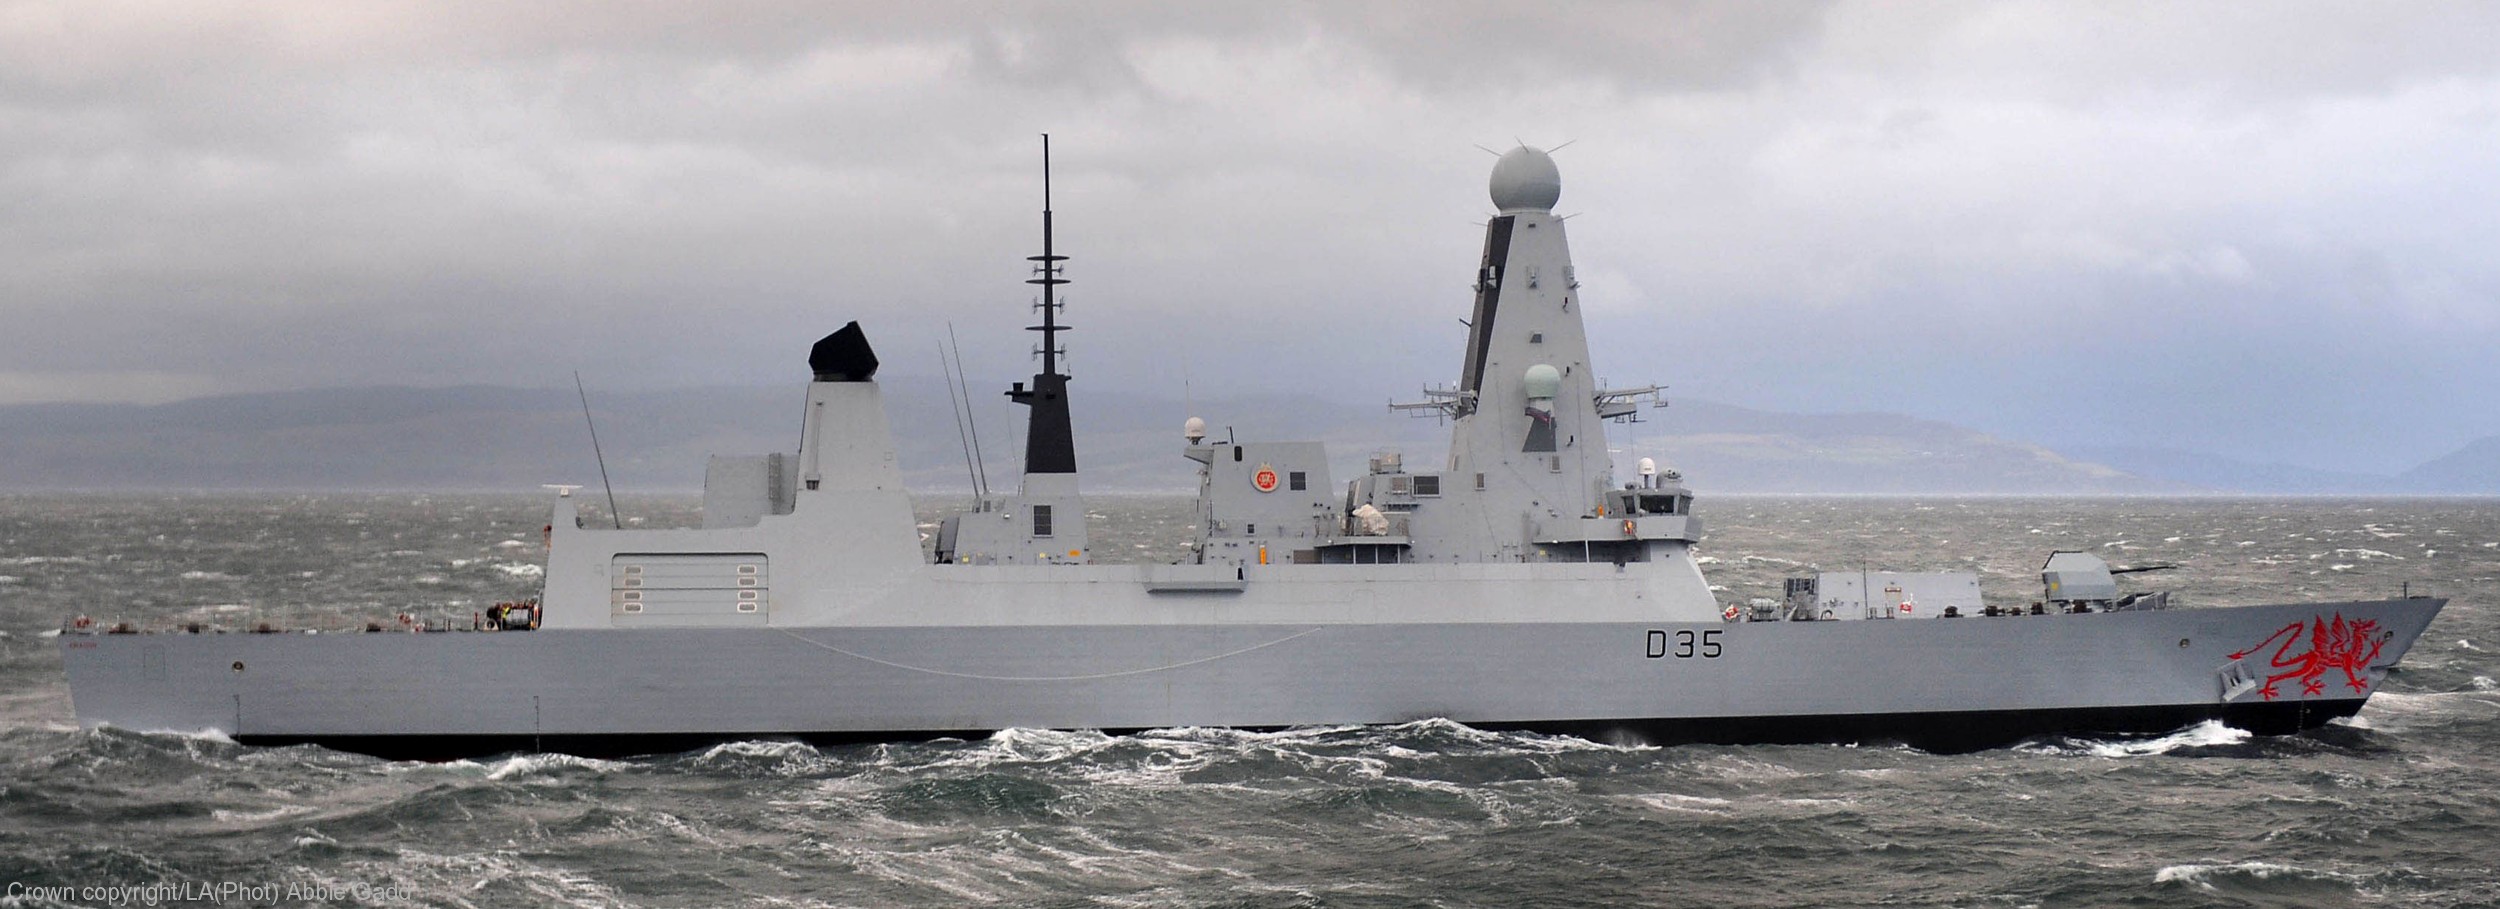 hms dragon d-35 type 45 daring class guided missile destroyer ddg royal navy sea viper paams 16